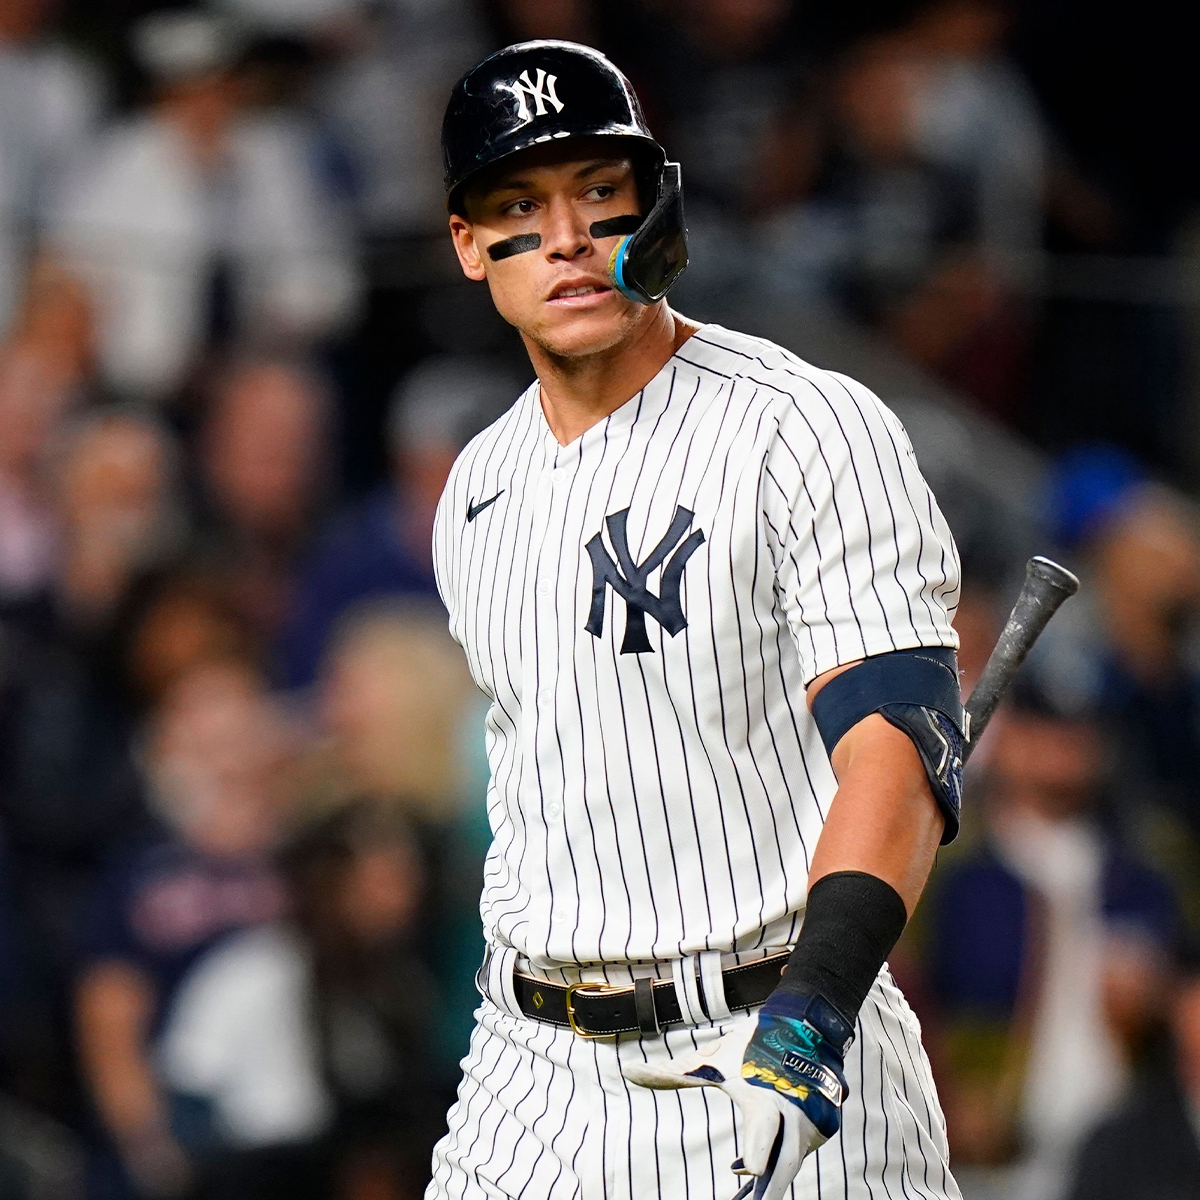 Aaron Judge ties AL home run record: What to know as Yankees star